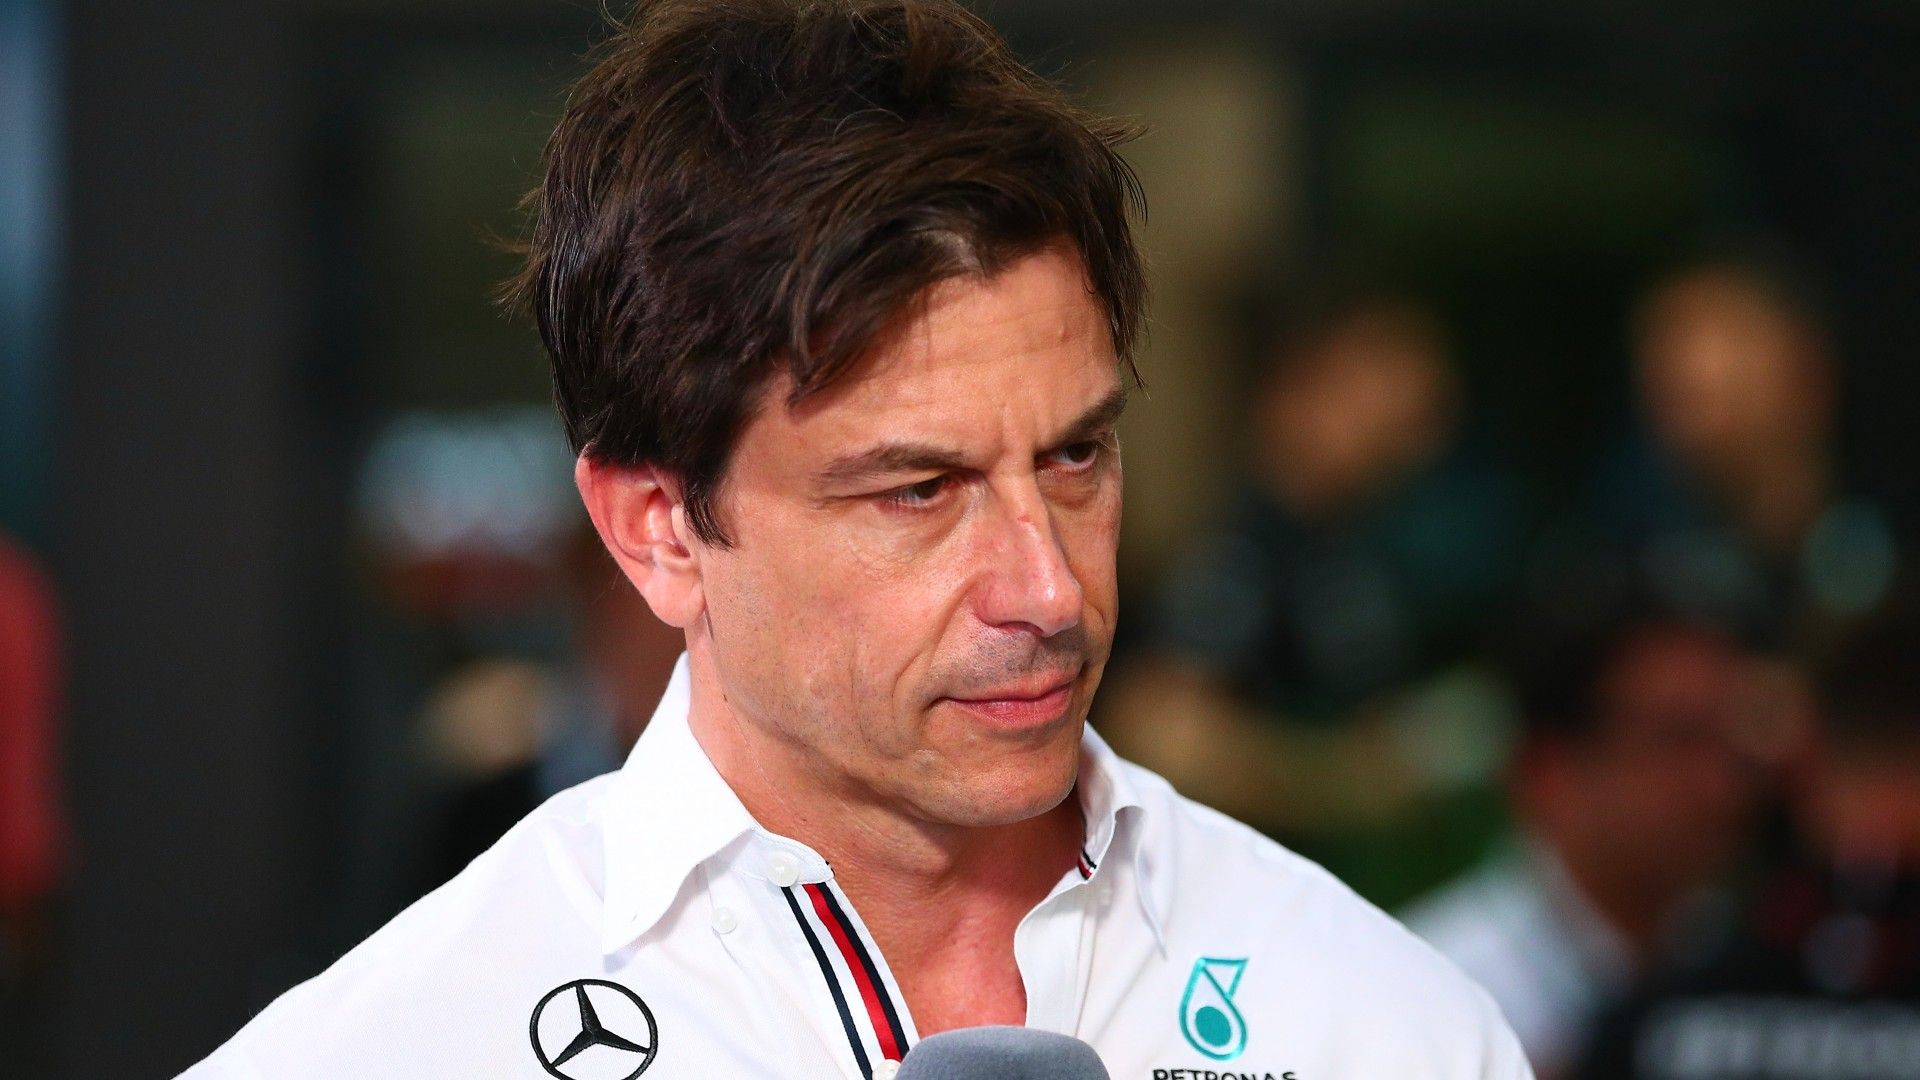 Toto Wolff confident Mercedes will not plummet after being knocked from Formula 1's top perch